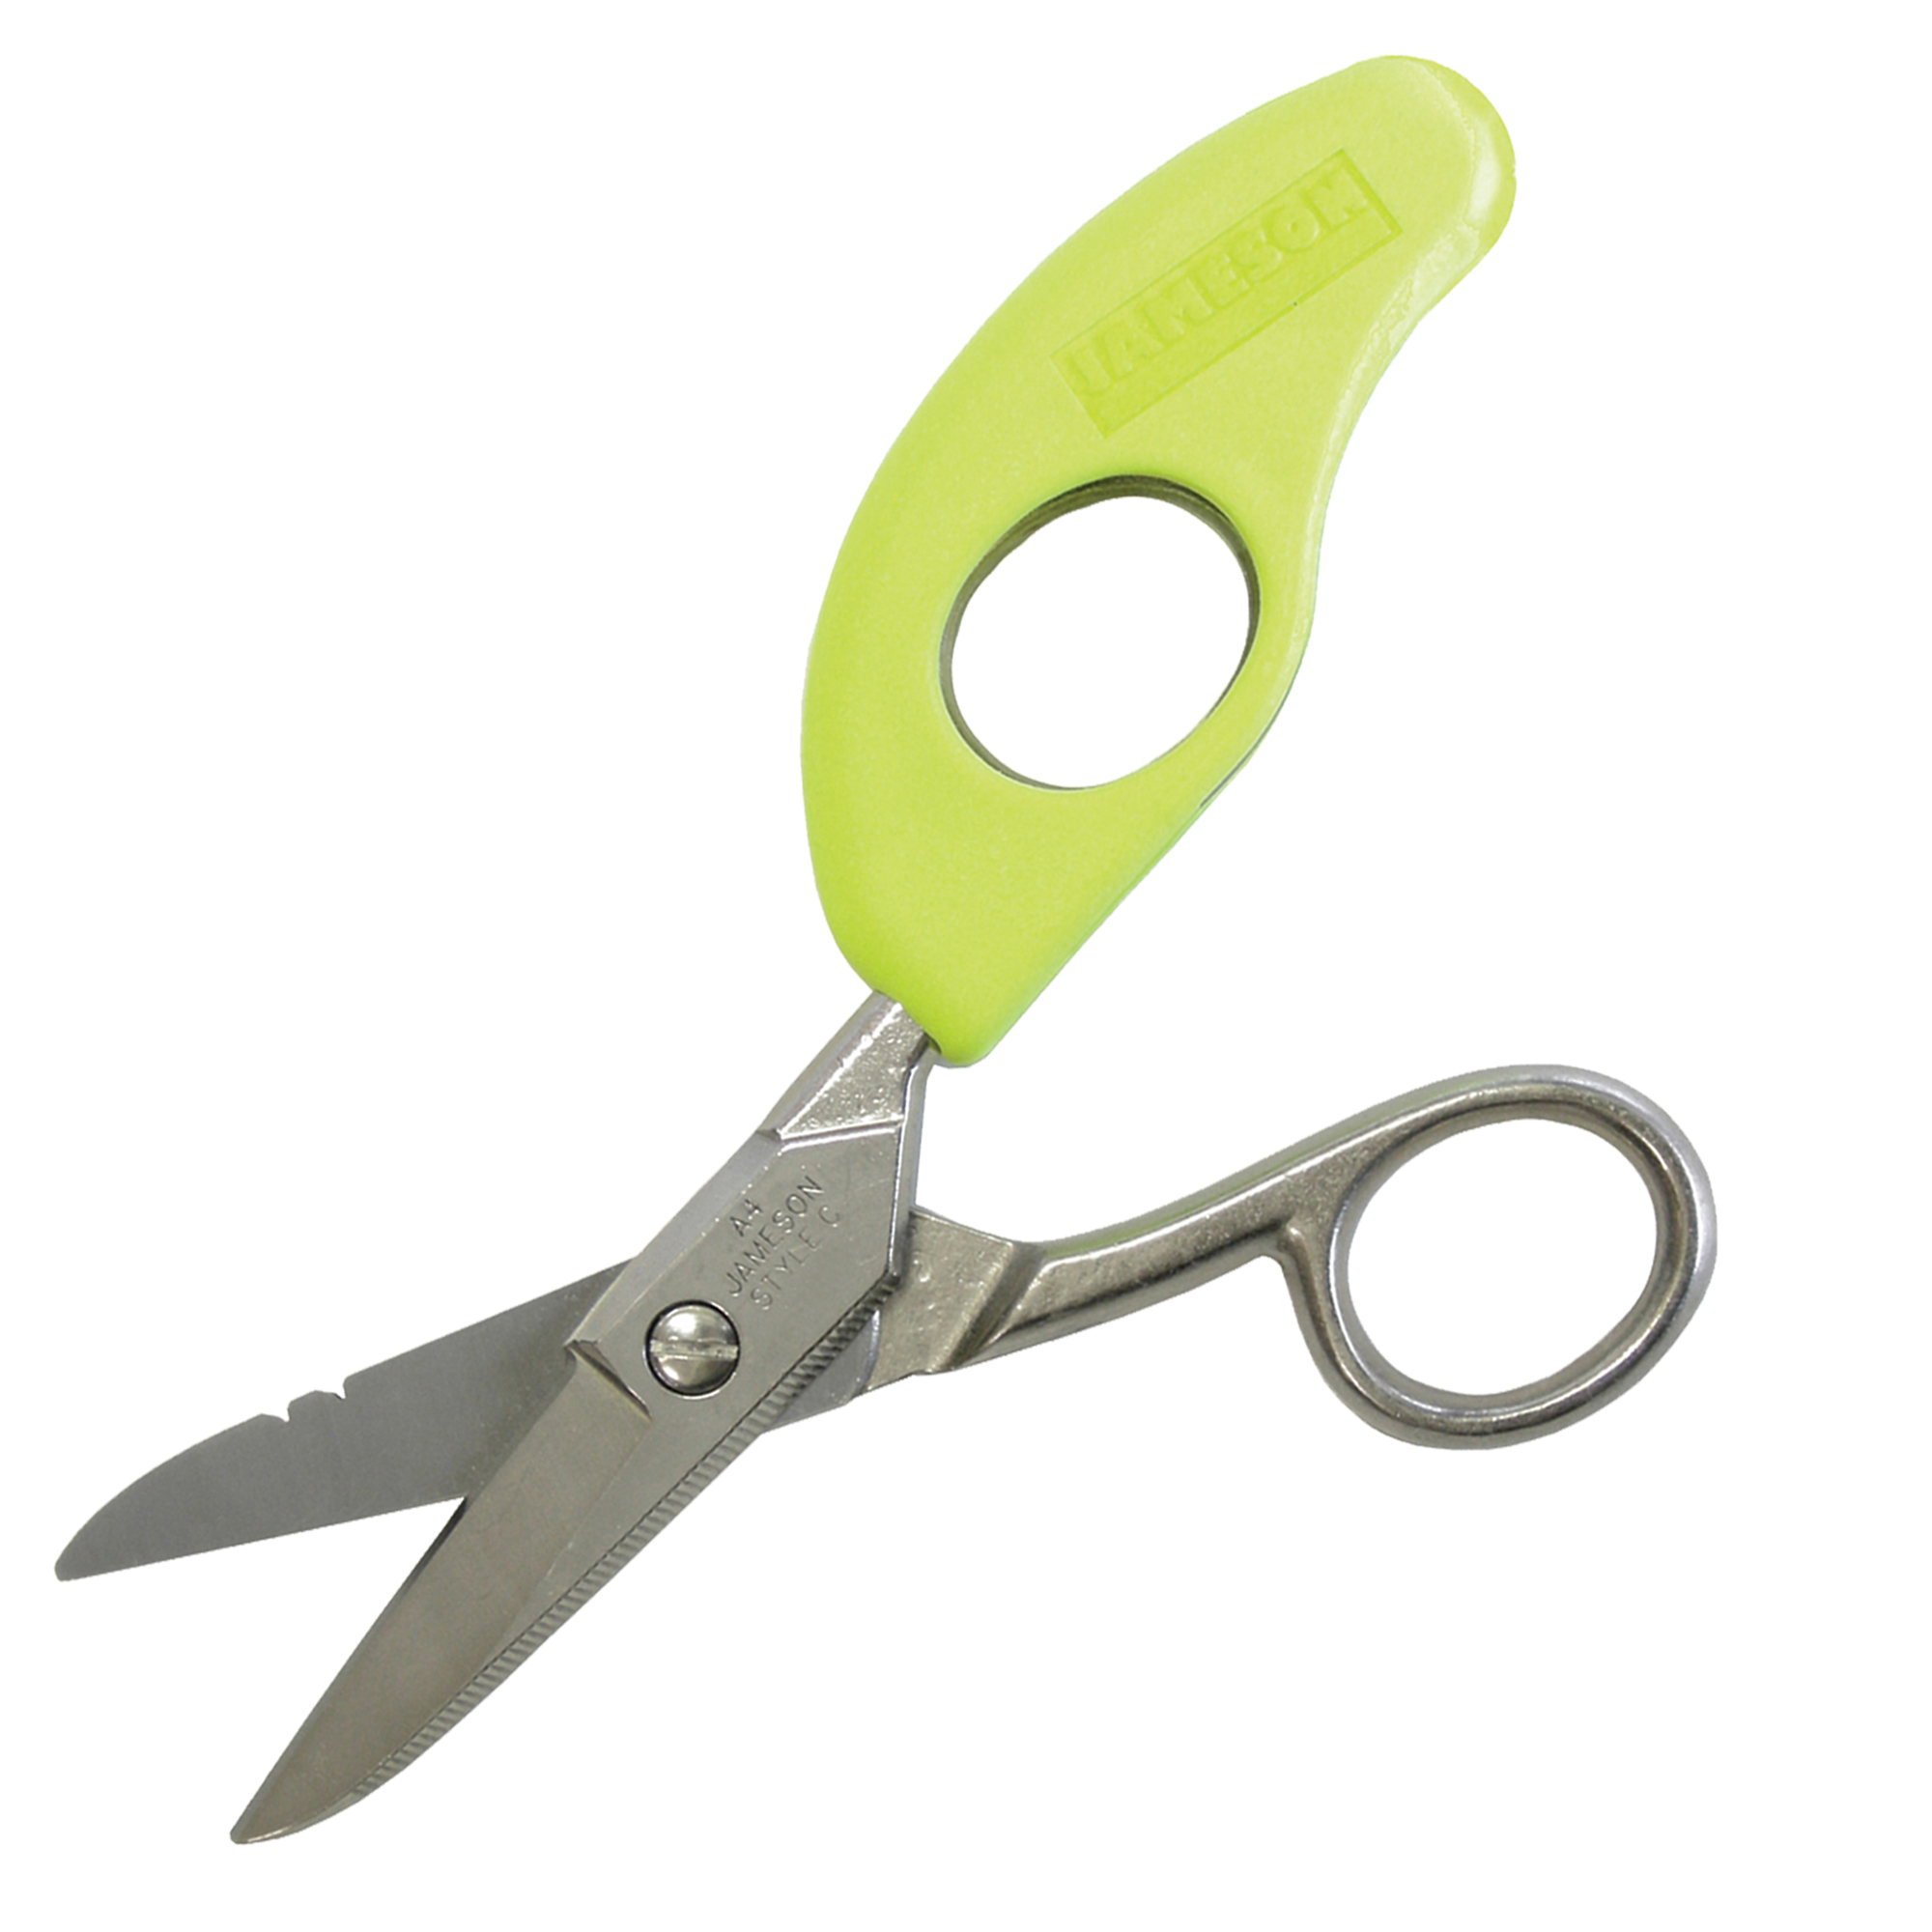 Electrician Scissors: Cut to the Chase